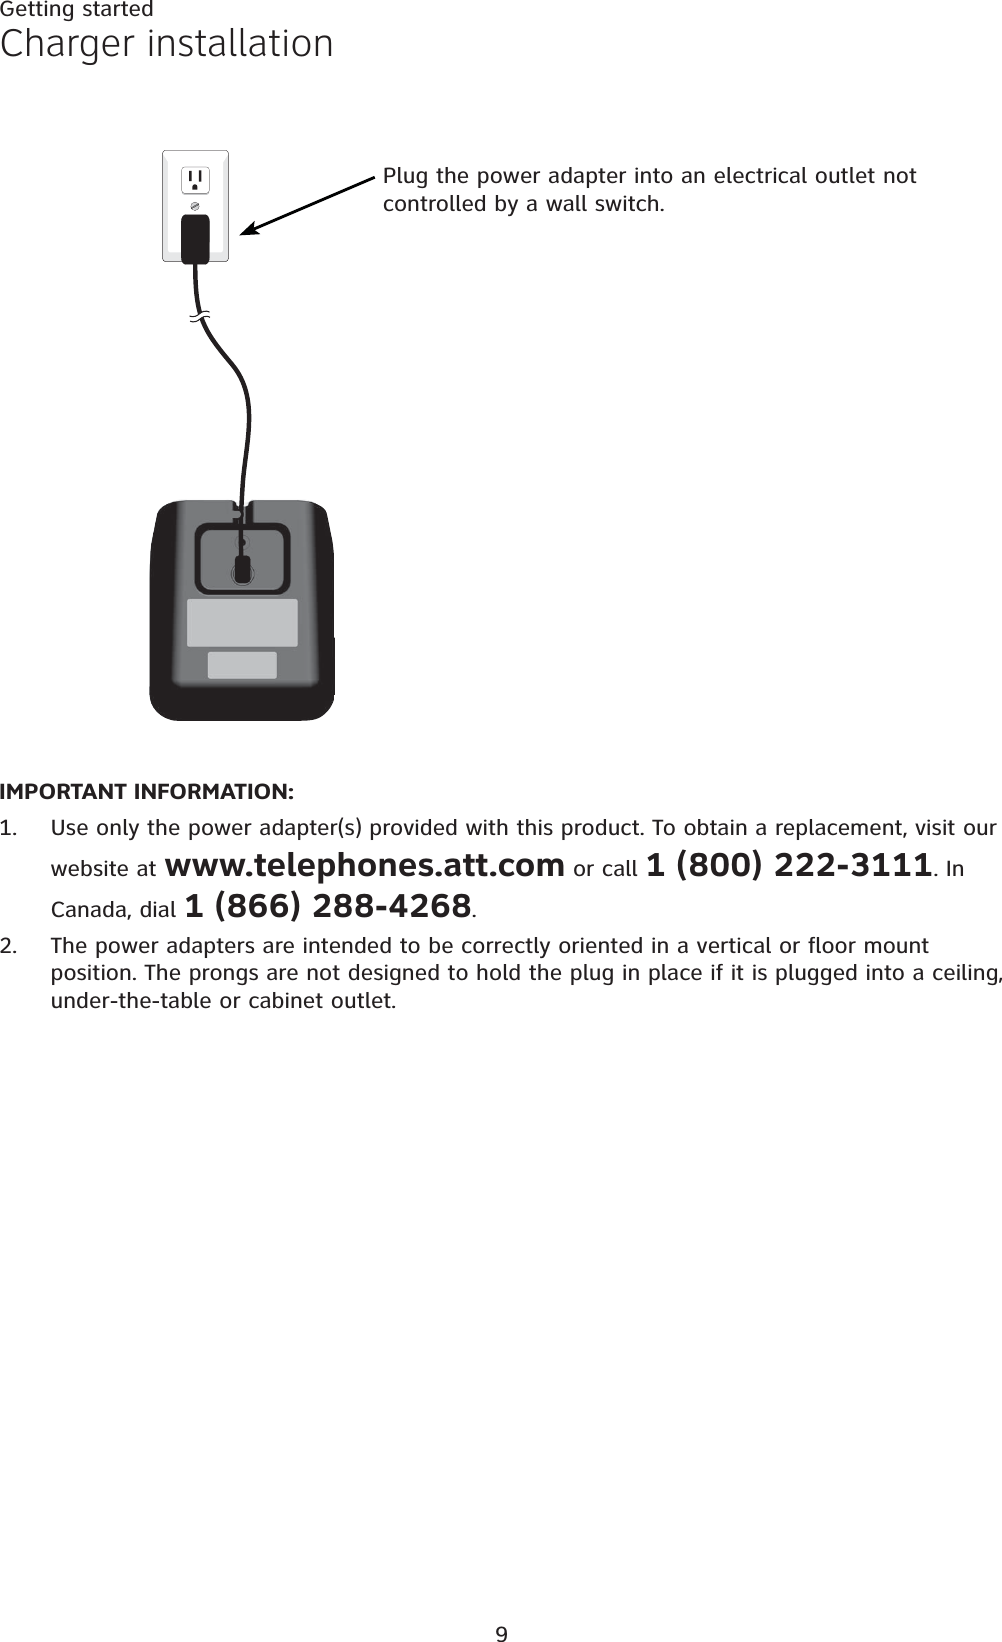 9Getting startedIMPORTANT INFORMATION:Use only the power adapter(s) provided with this product. To obtain a replacement, visit our website at www.telephones.att.com or call 1 (800) 222-3111. In Canada, dial 1 (866) 288-4268.The power adapters are intended to be correctly oriented in a vertical or floor mount position. The prongs are not designed to hold the plug in place if it is plugged into a ceiling, under-the-table or cabinet outlet.1.2.Charger installationPlug the power adapter into an electrical outlet not controlled by a wall switch.